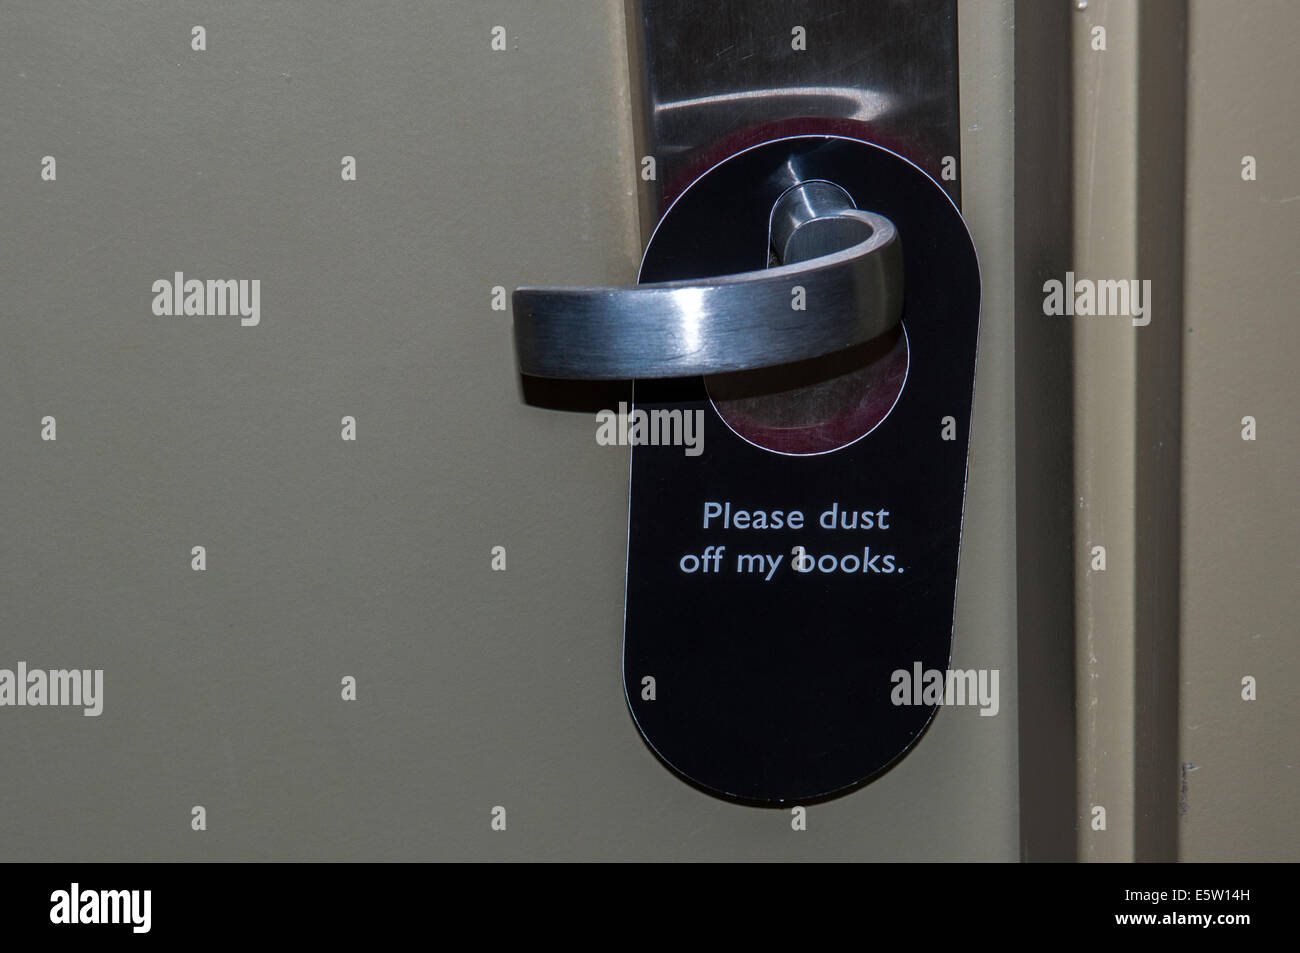 A 'Please dust of my books' sign hangs on a hotel room door handle indicating the room needs cleaning. Stock Photo